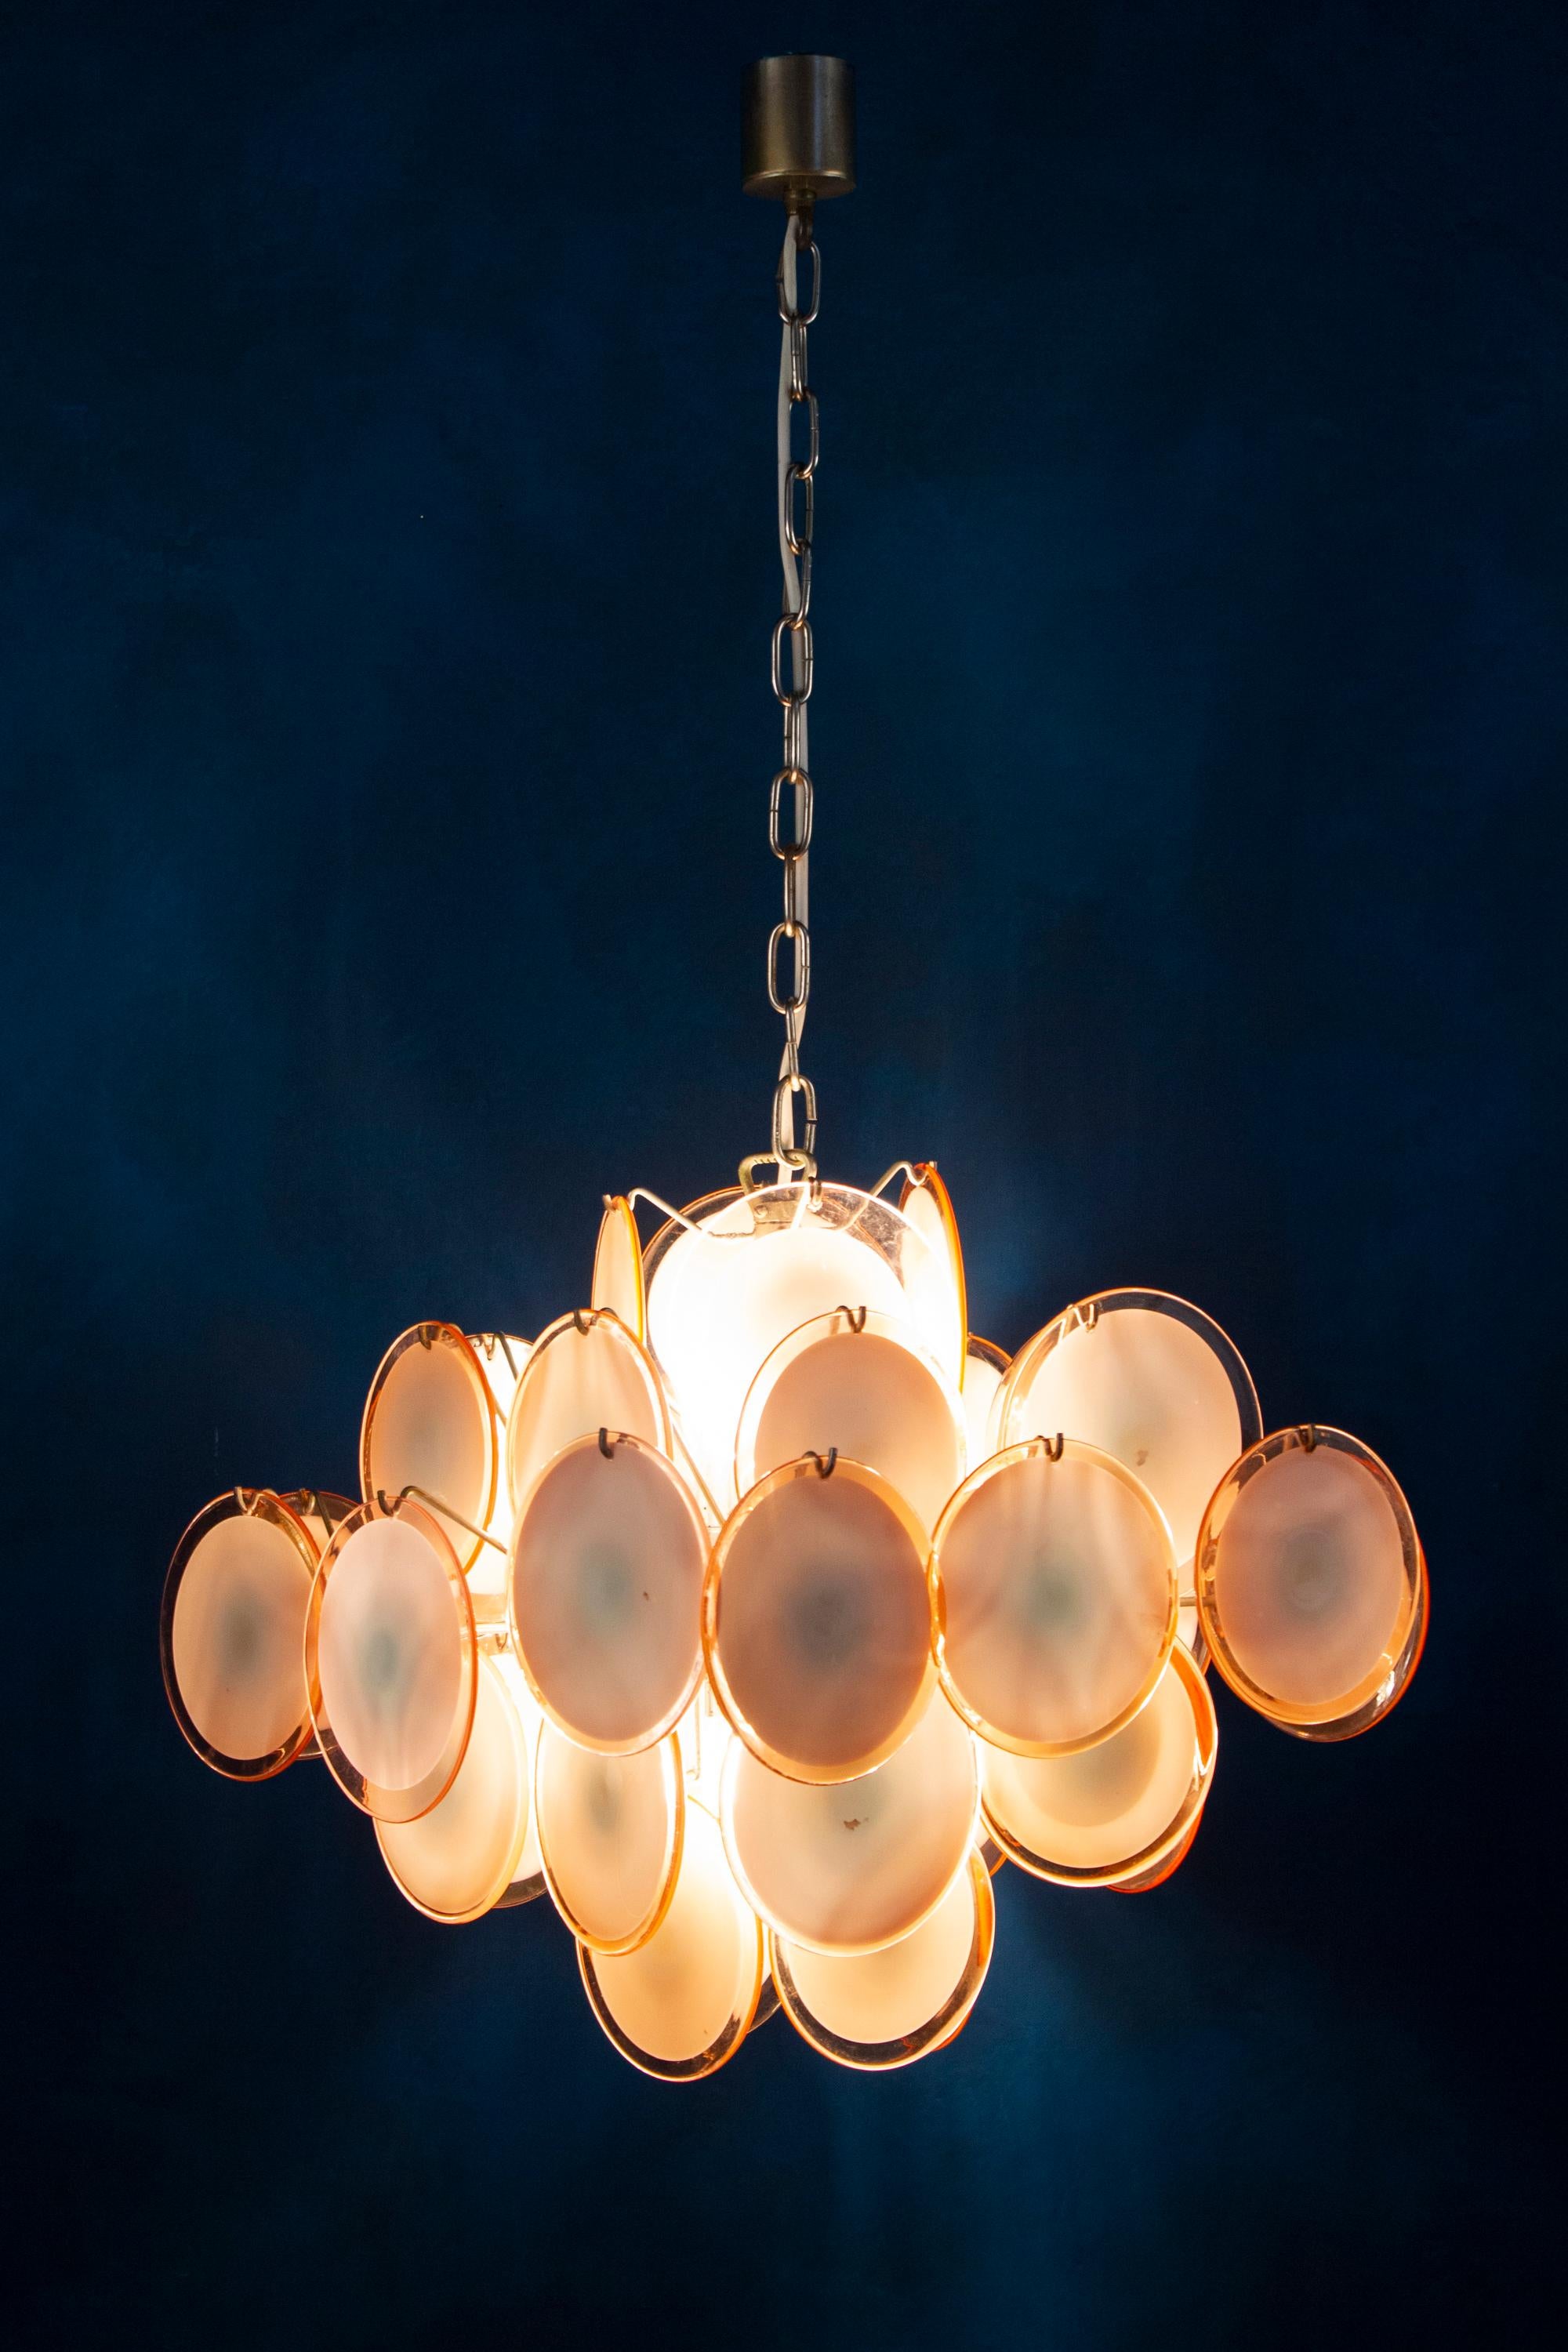 Murano Disc Chandelier Attributed to Vistosi, 1970s For Sale 2